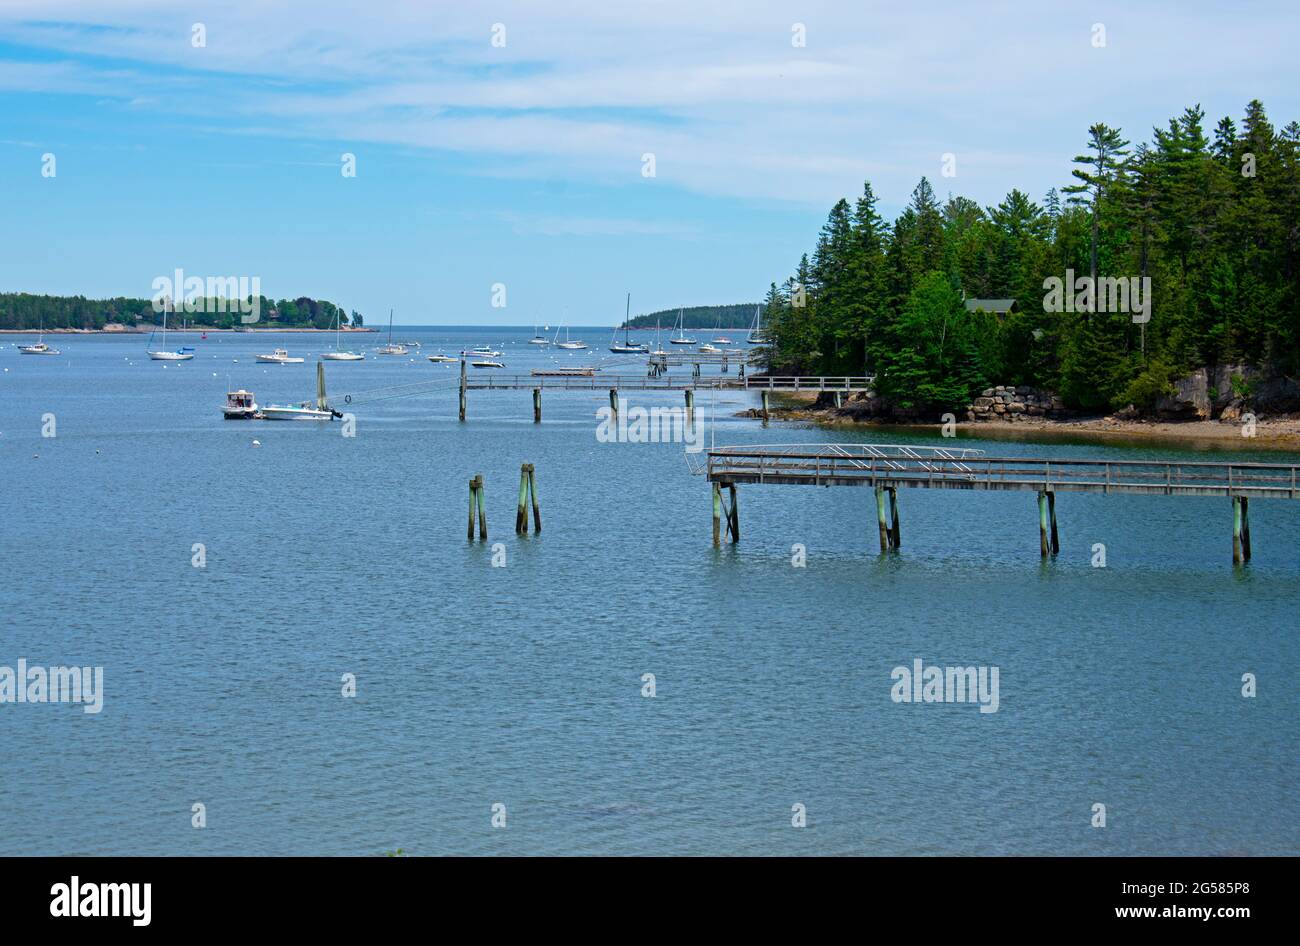 Variety of nautical vessels moored on calm blue waters of a Maine harbor under a blue sky with some cirrus clouds -04 Stock Photo